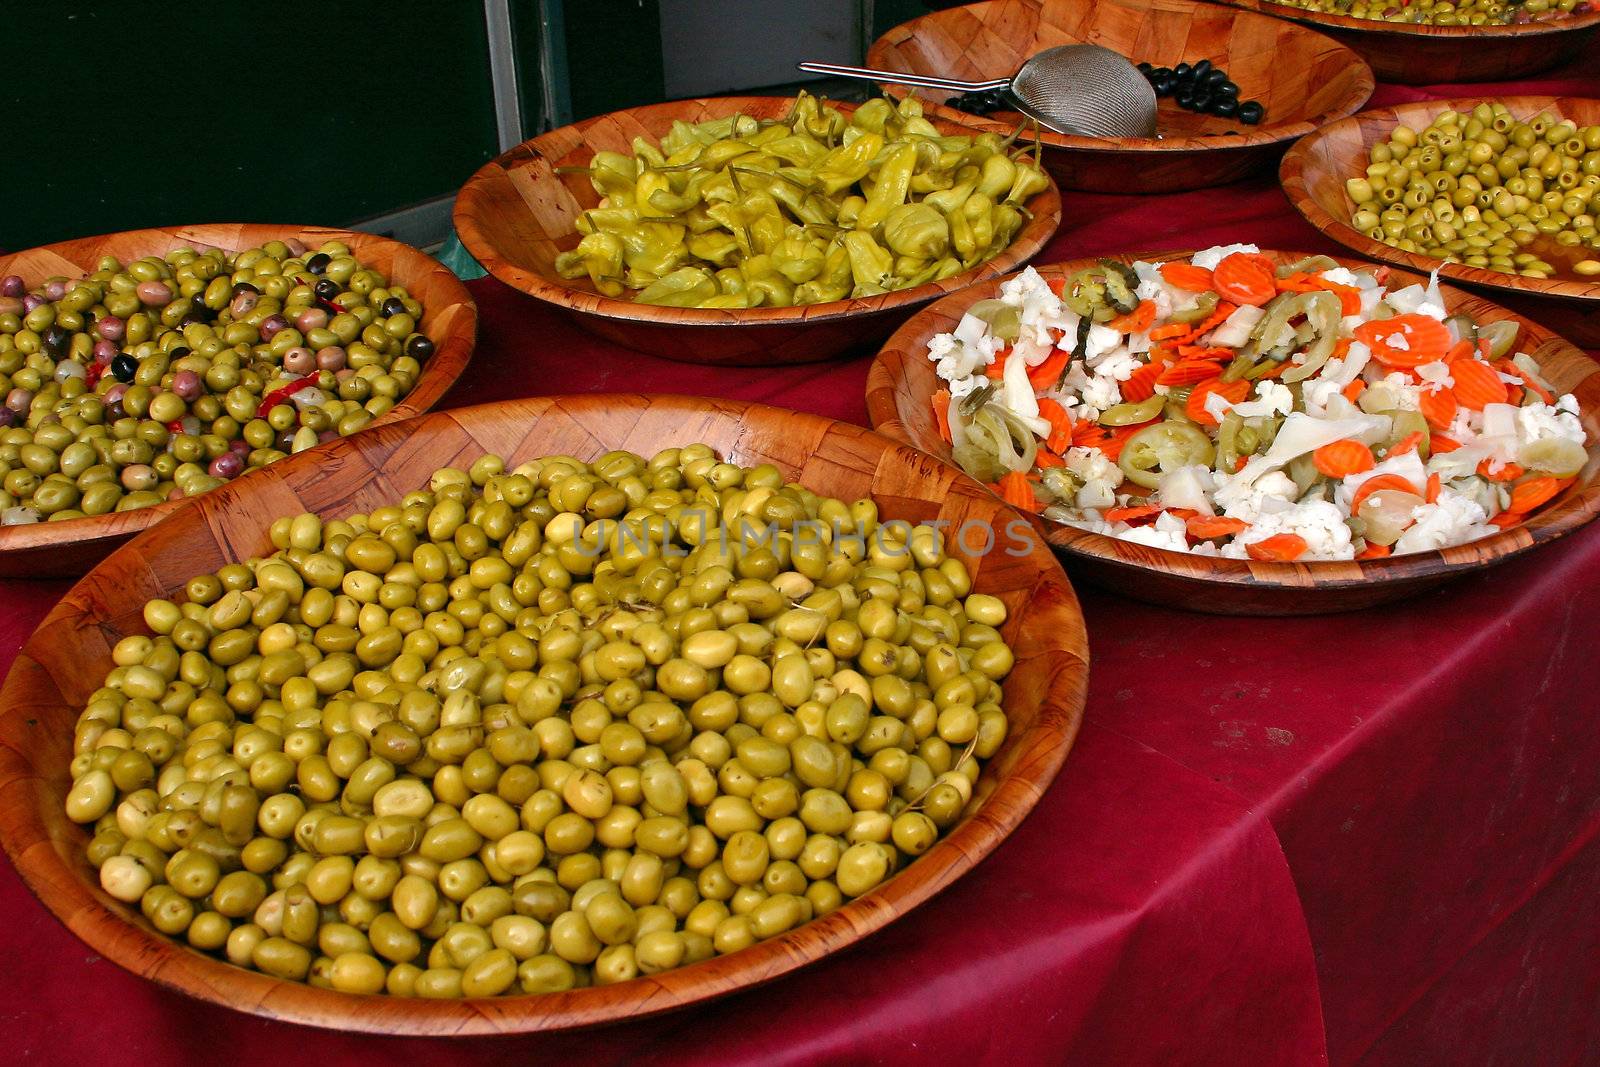 Fresh olives at the local market